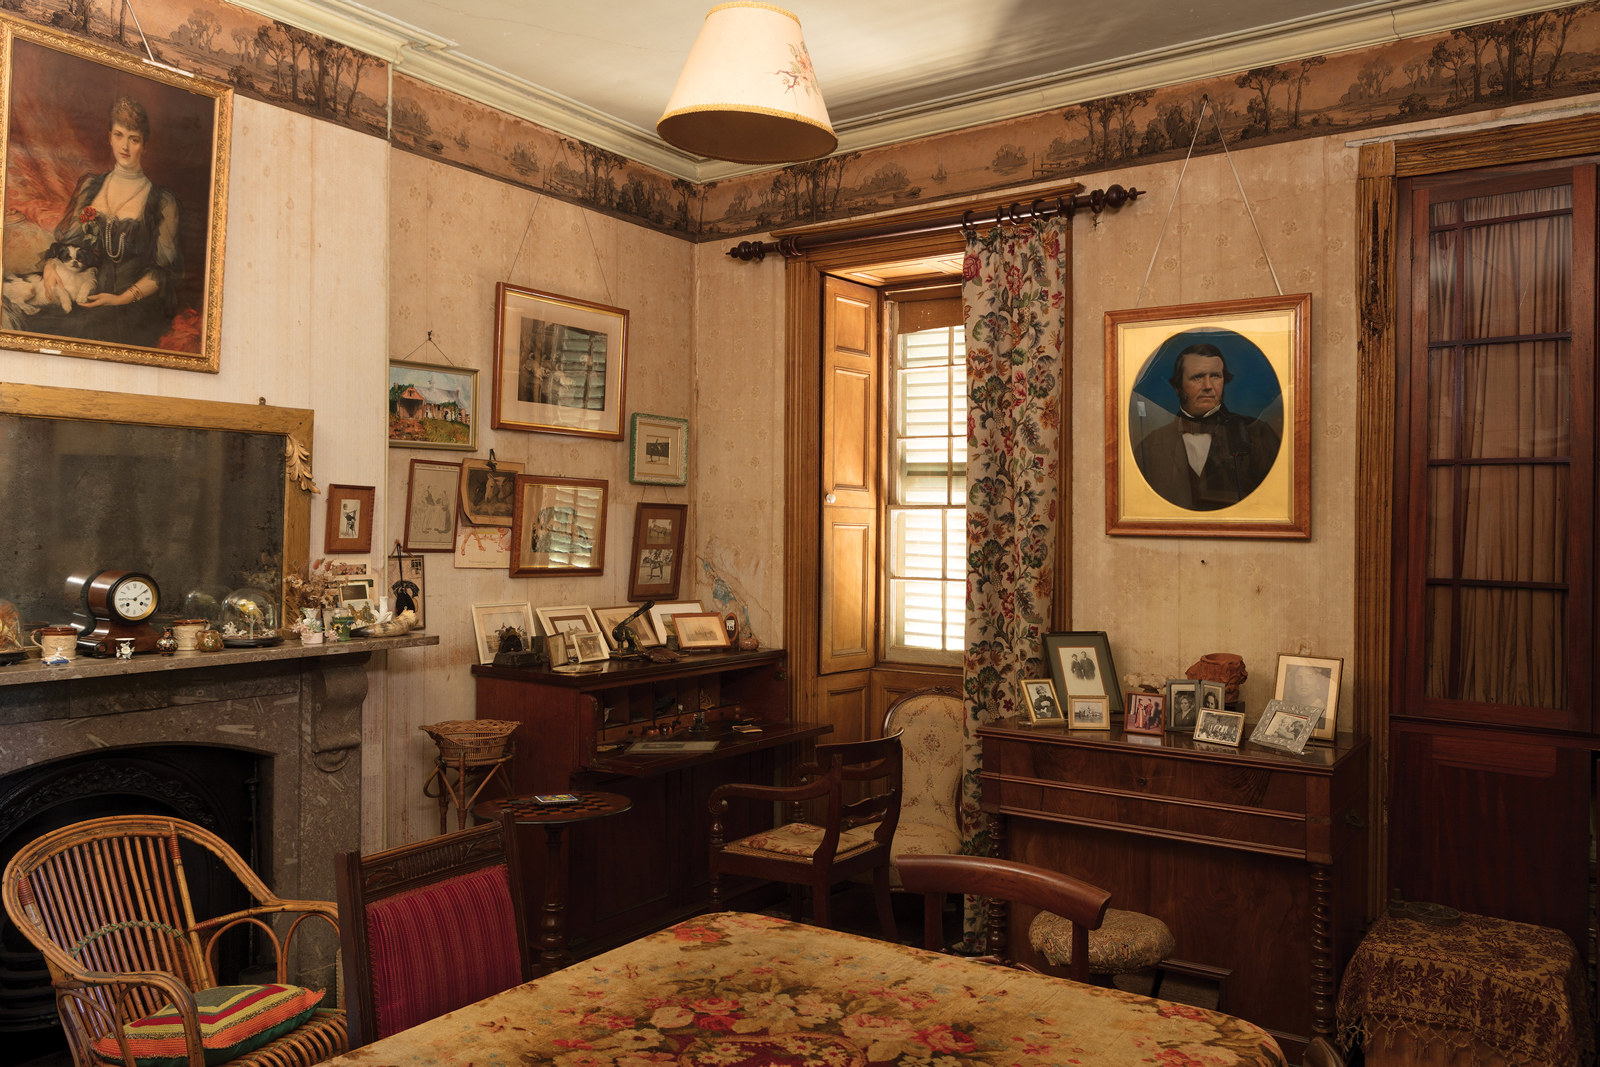 Corner of room with harmonium and several framed photographs near window.